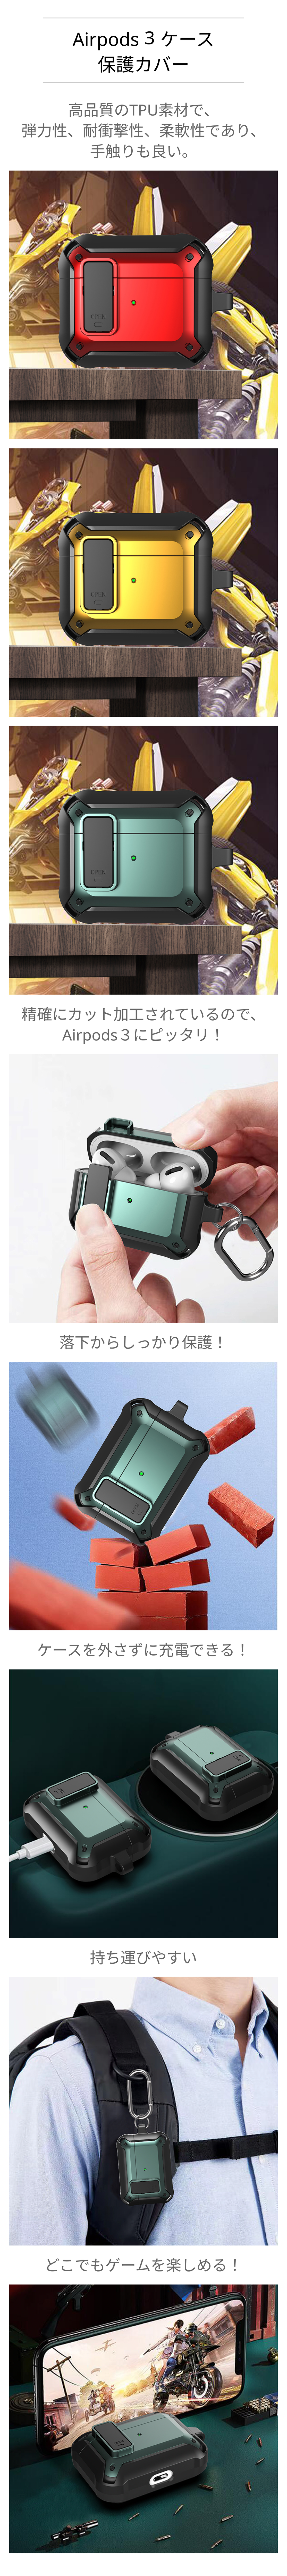 Airpods 3 ケース.png